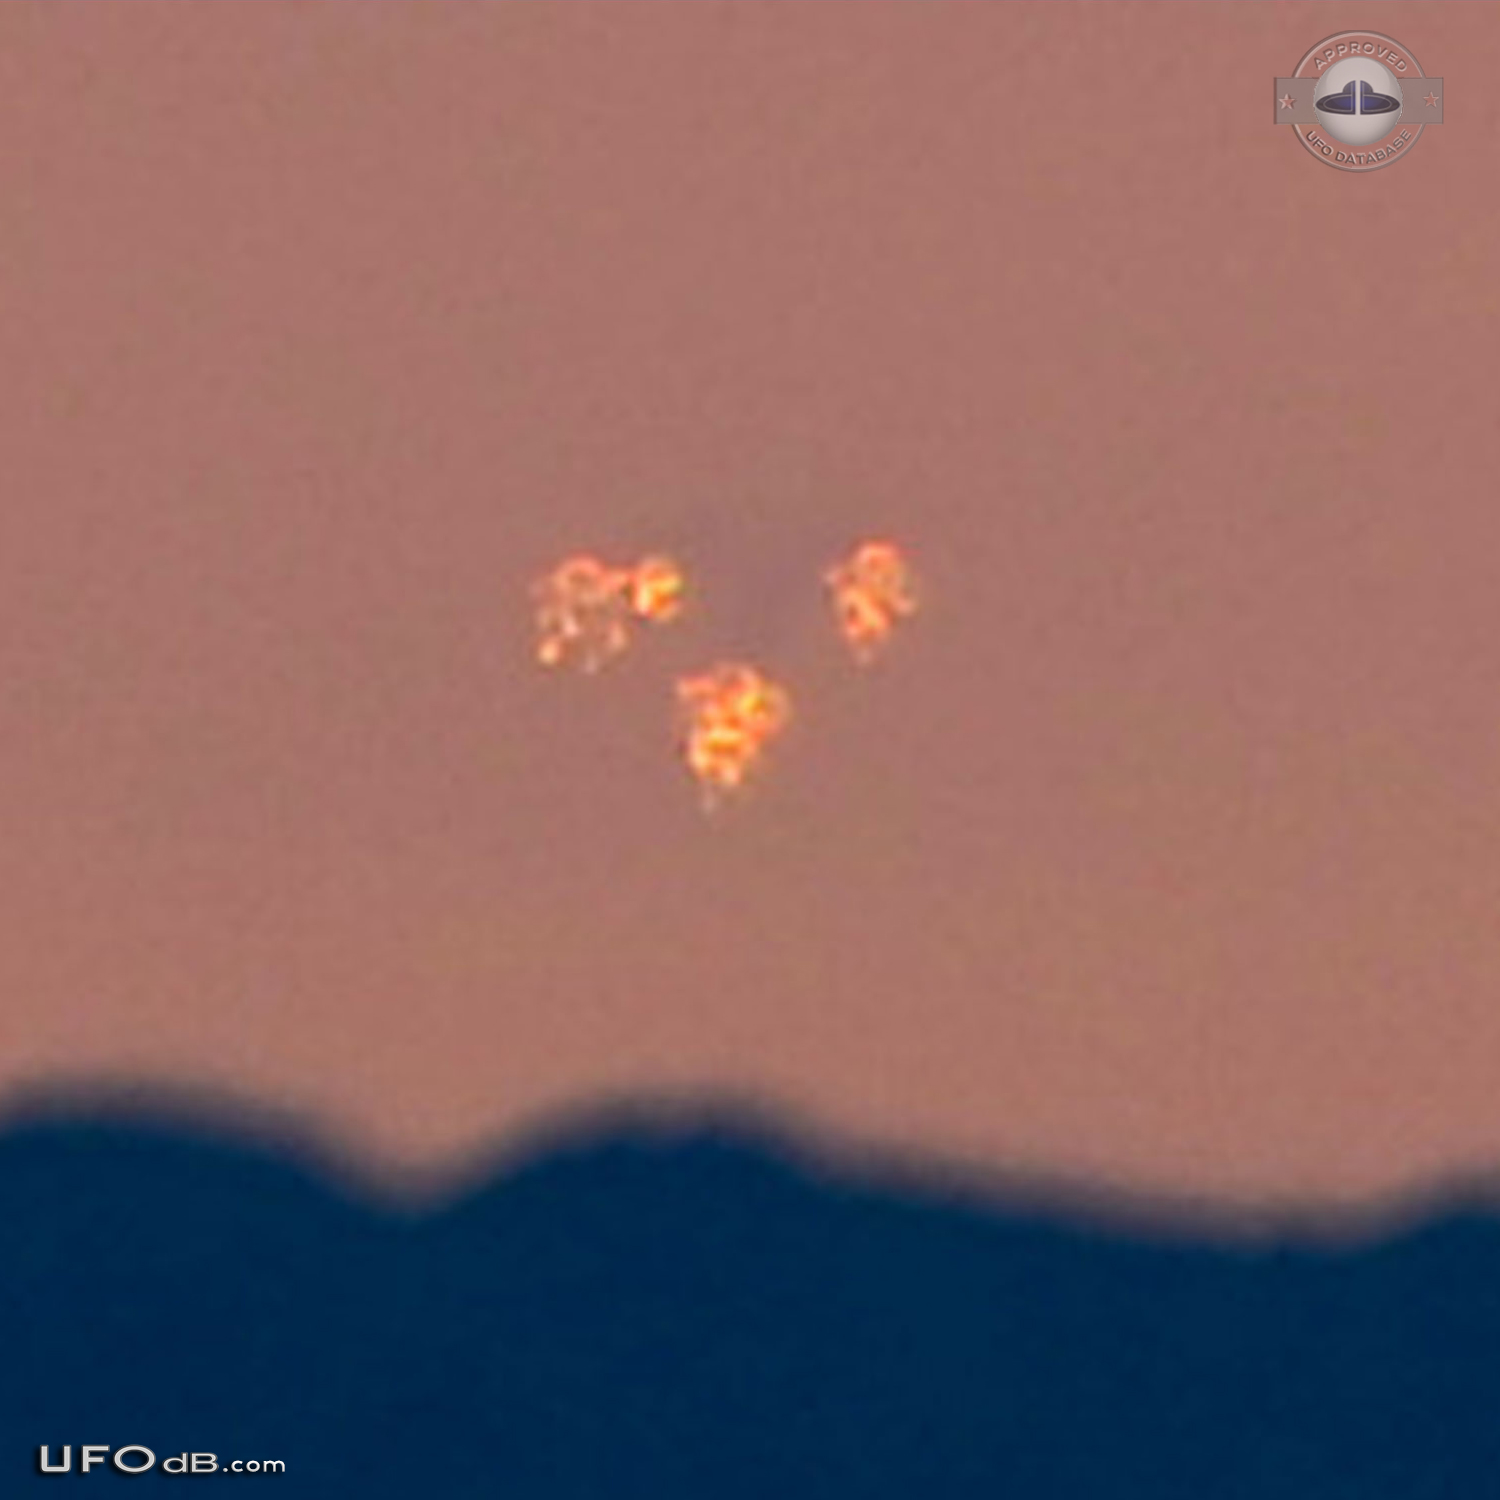 Famous UFO photos in the News - Fleet of UFOs Gila Bend, Arizona 2012 UFO Picture #534-3